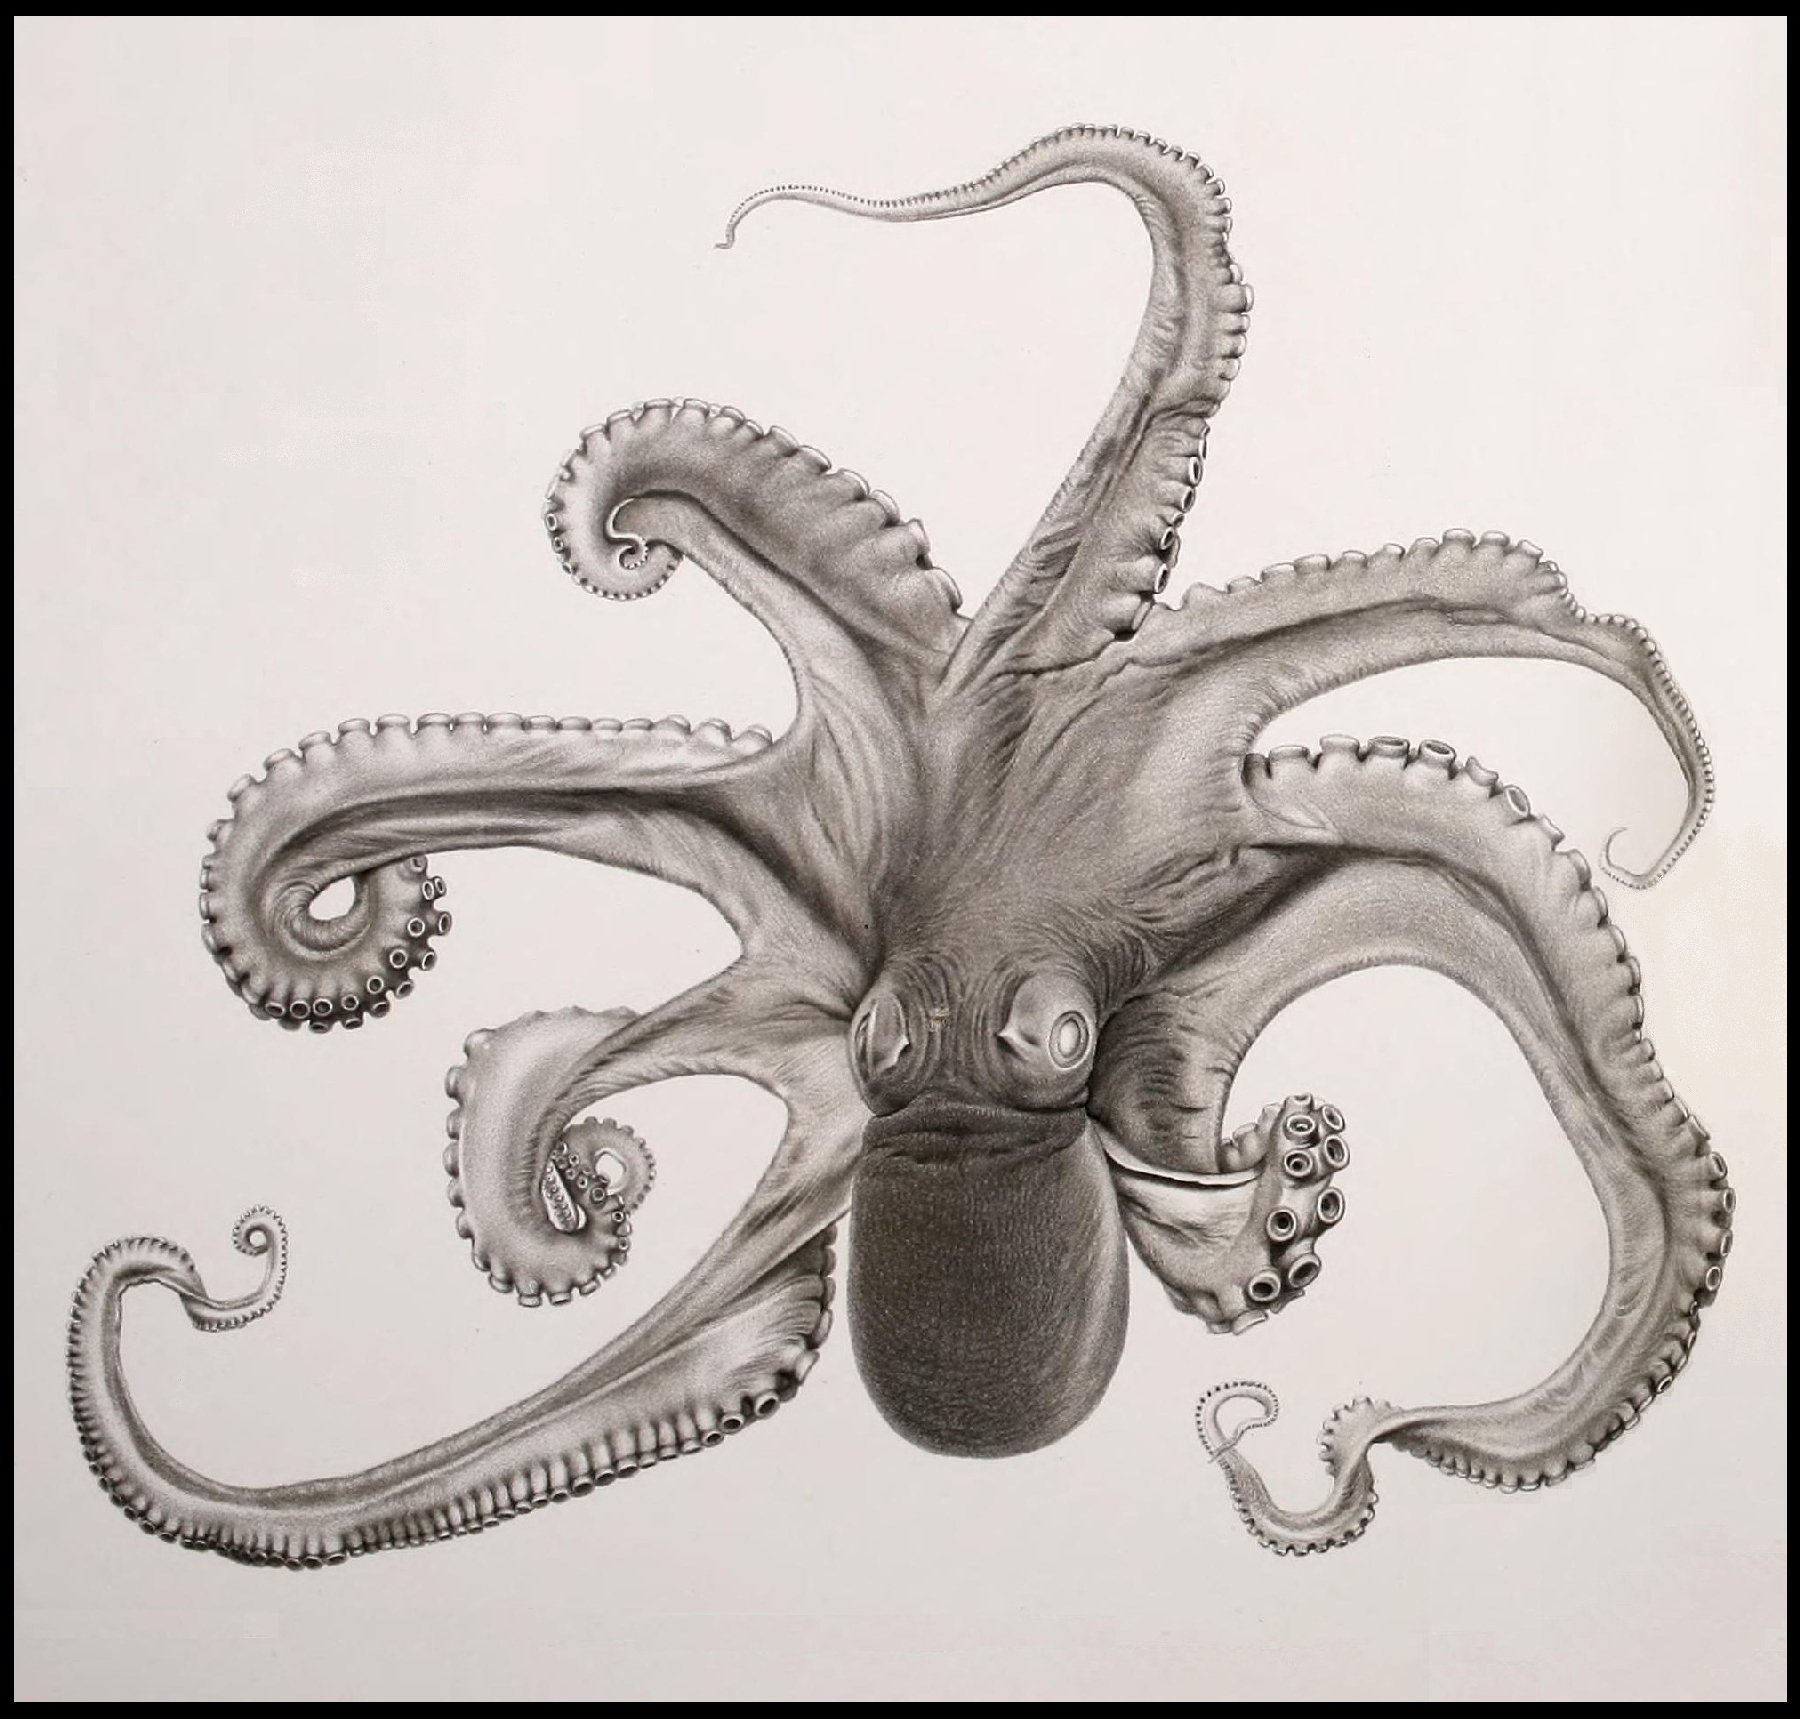 a drawing of an octo with its mouth open